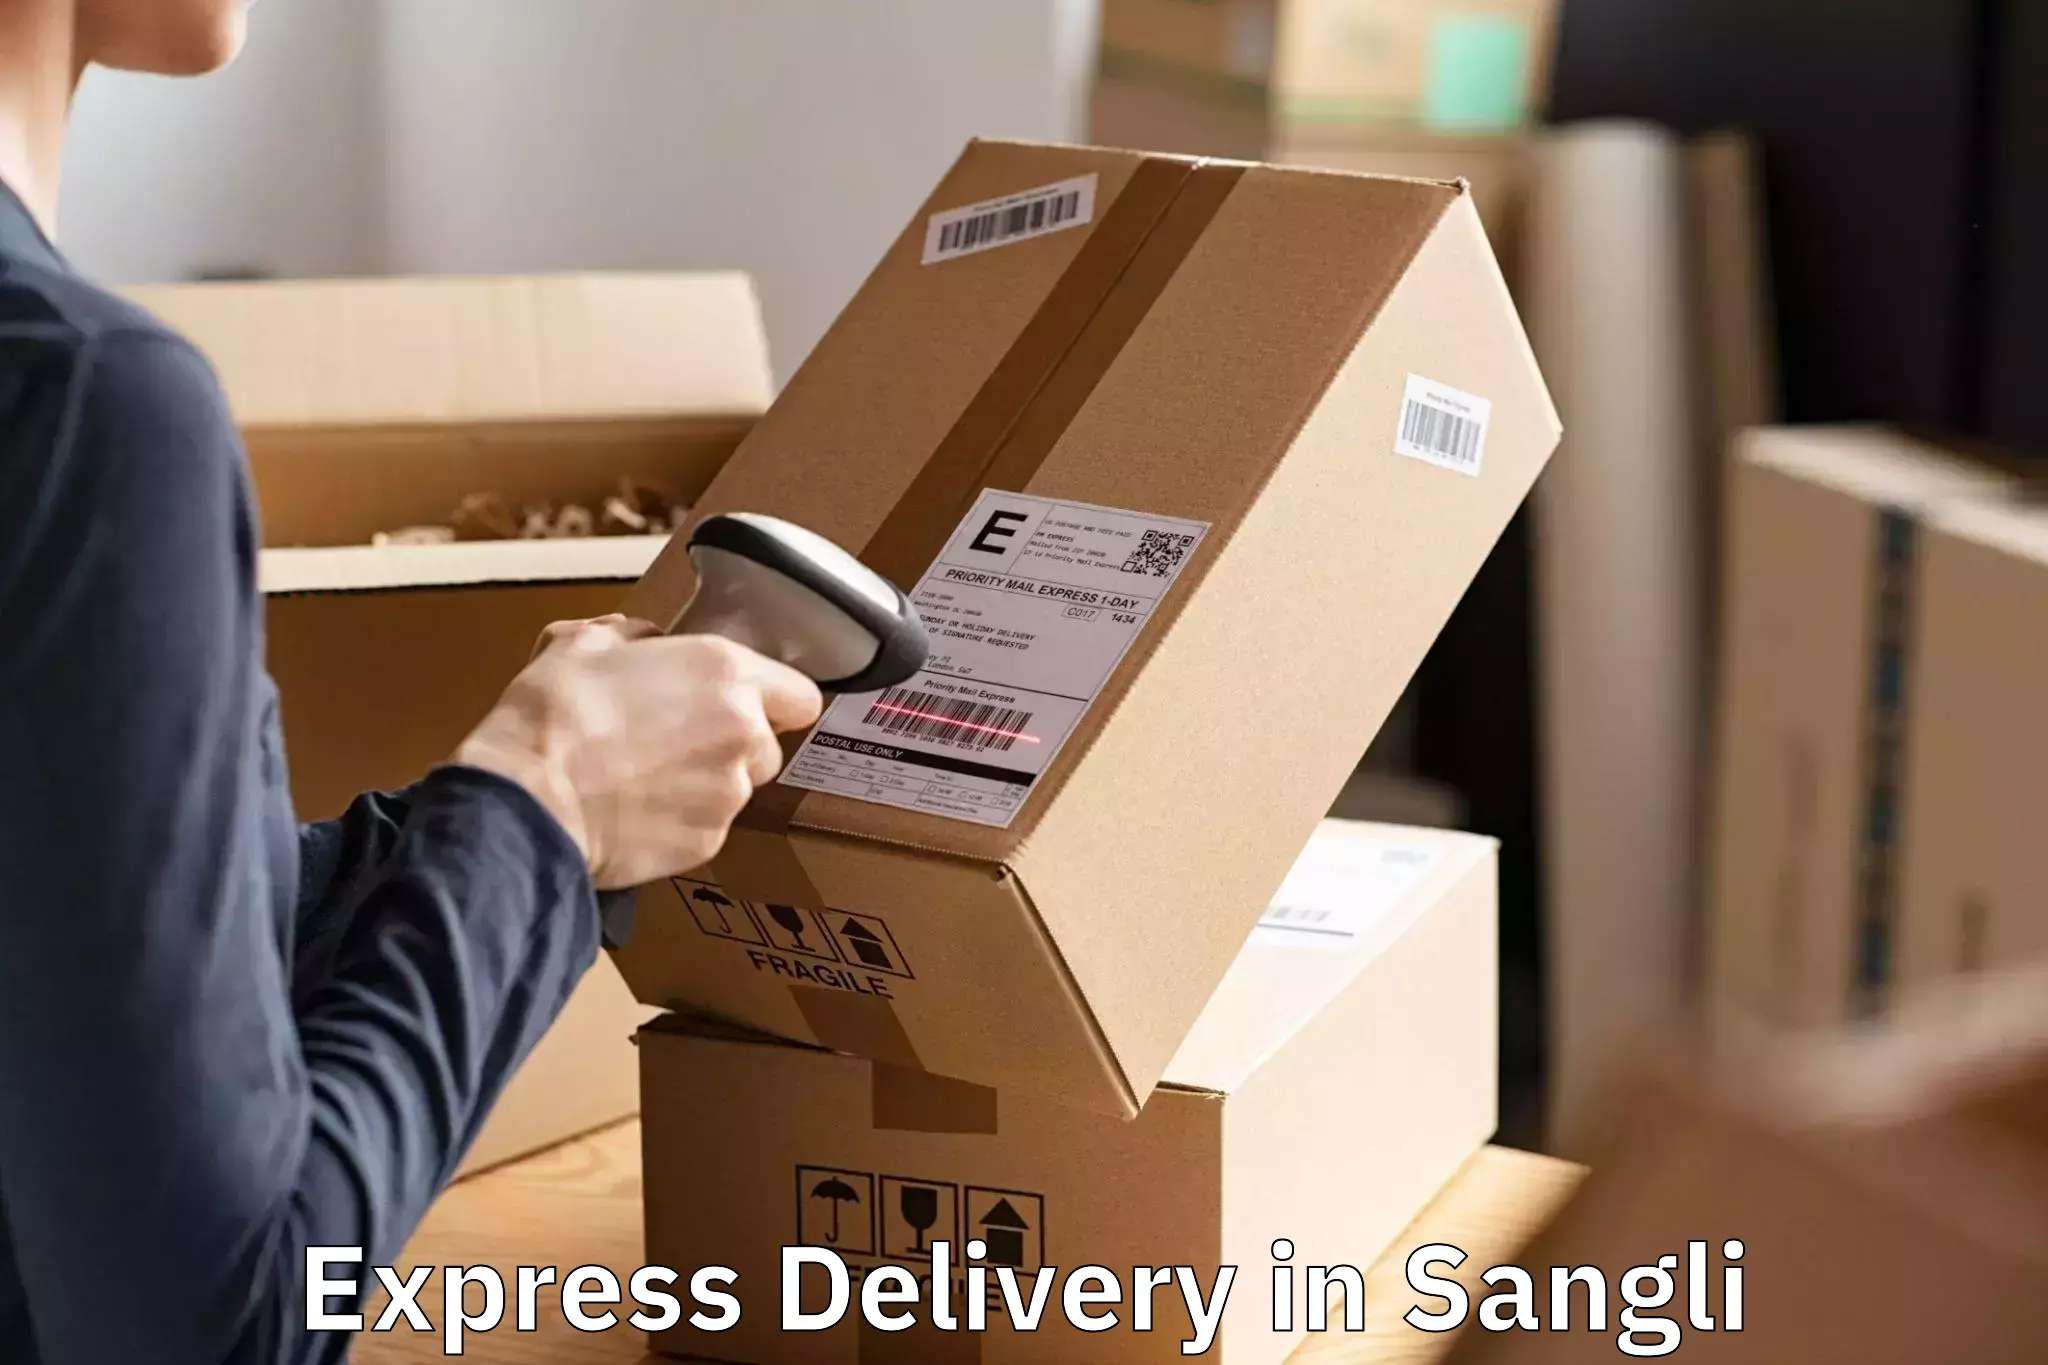 Get Express Delivery in Sangli, Maharashtra (MH)